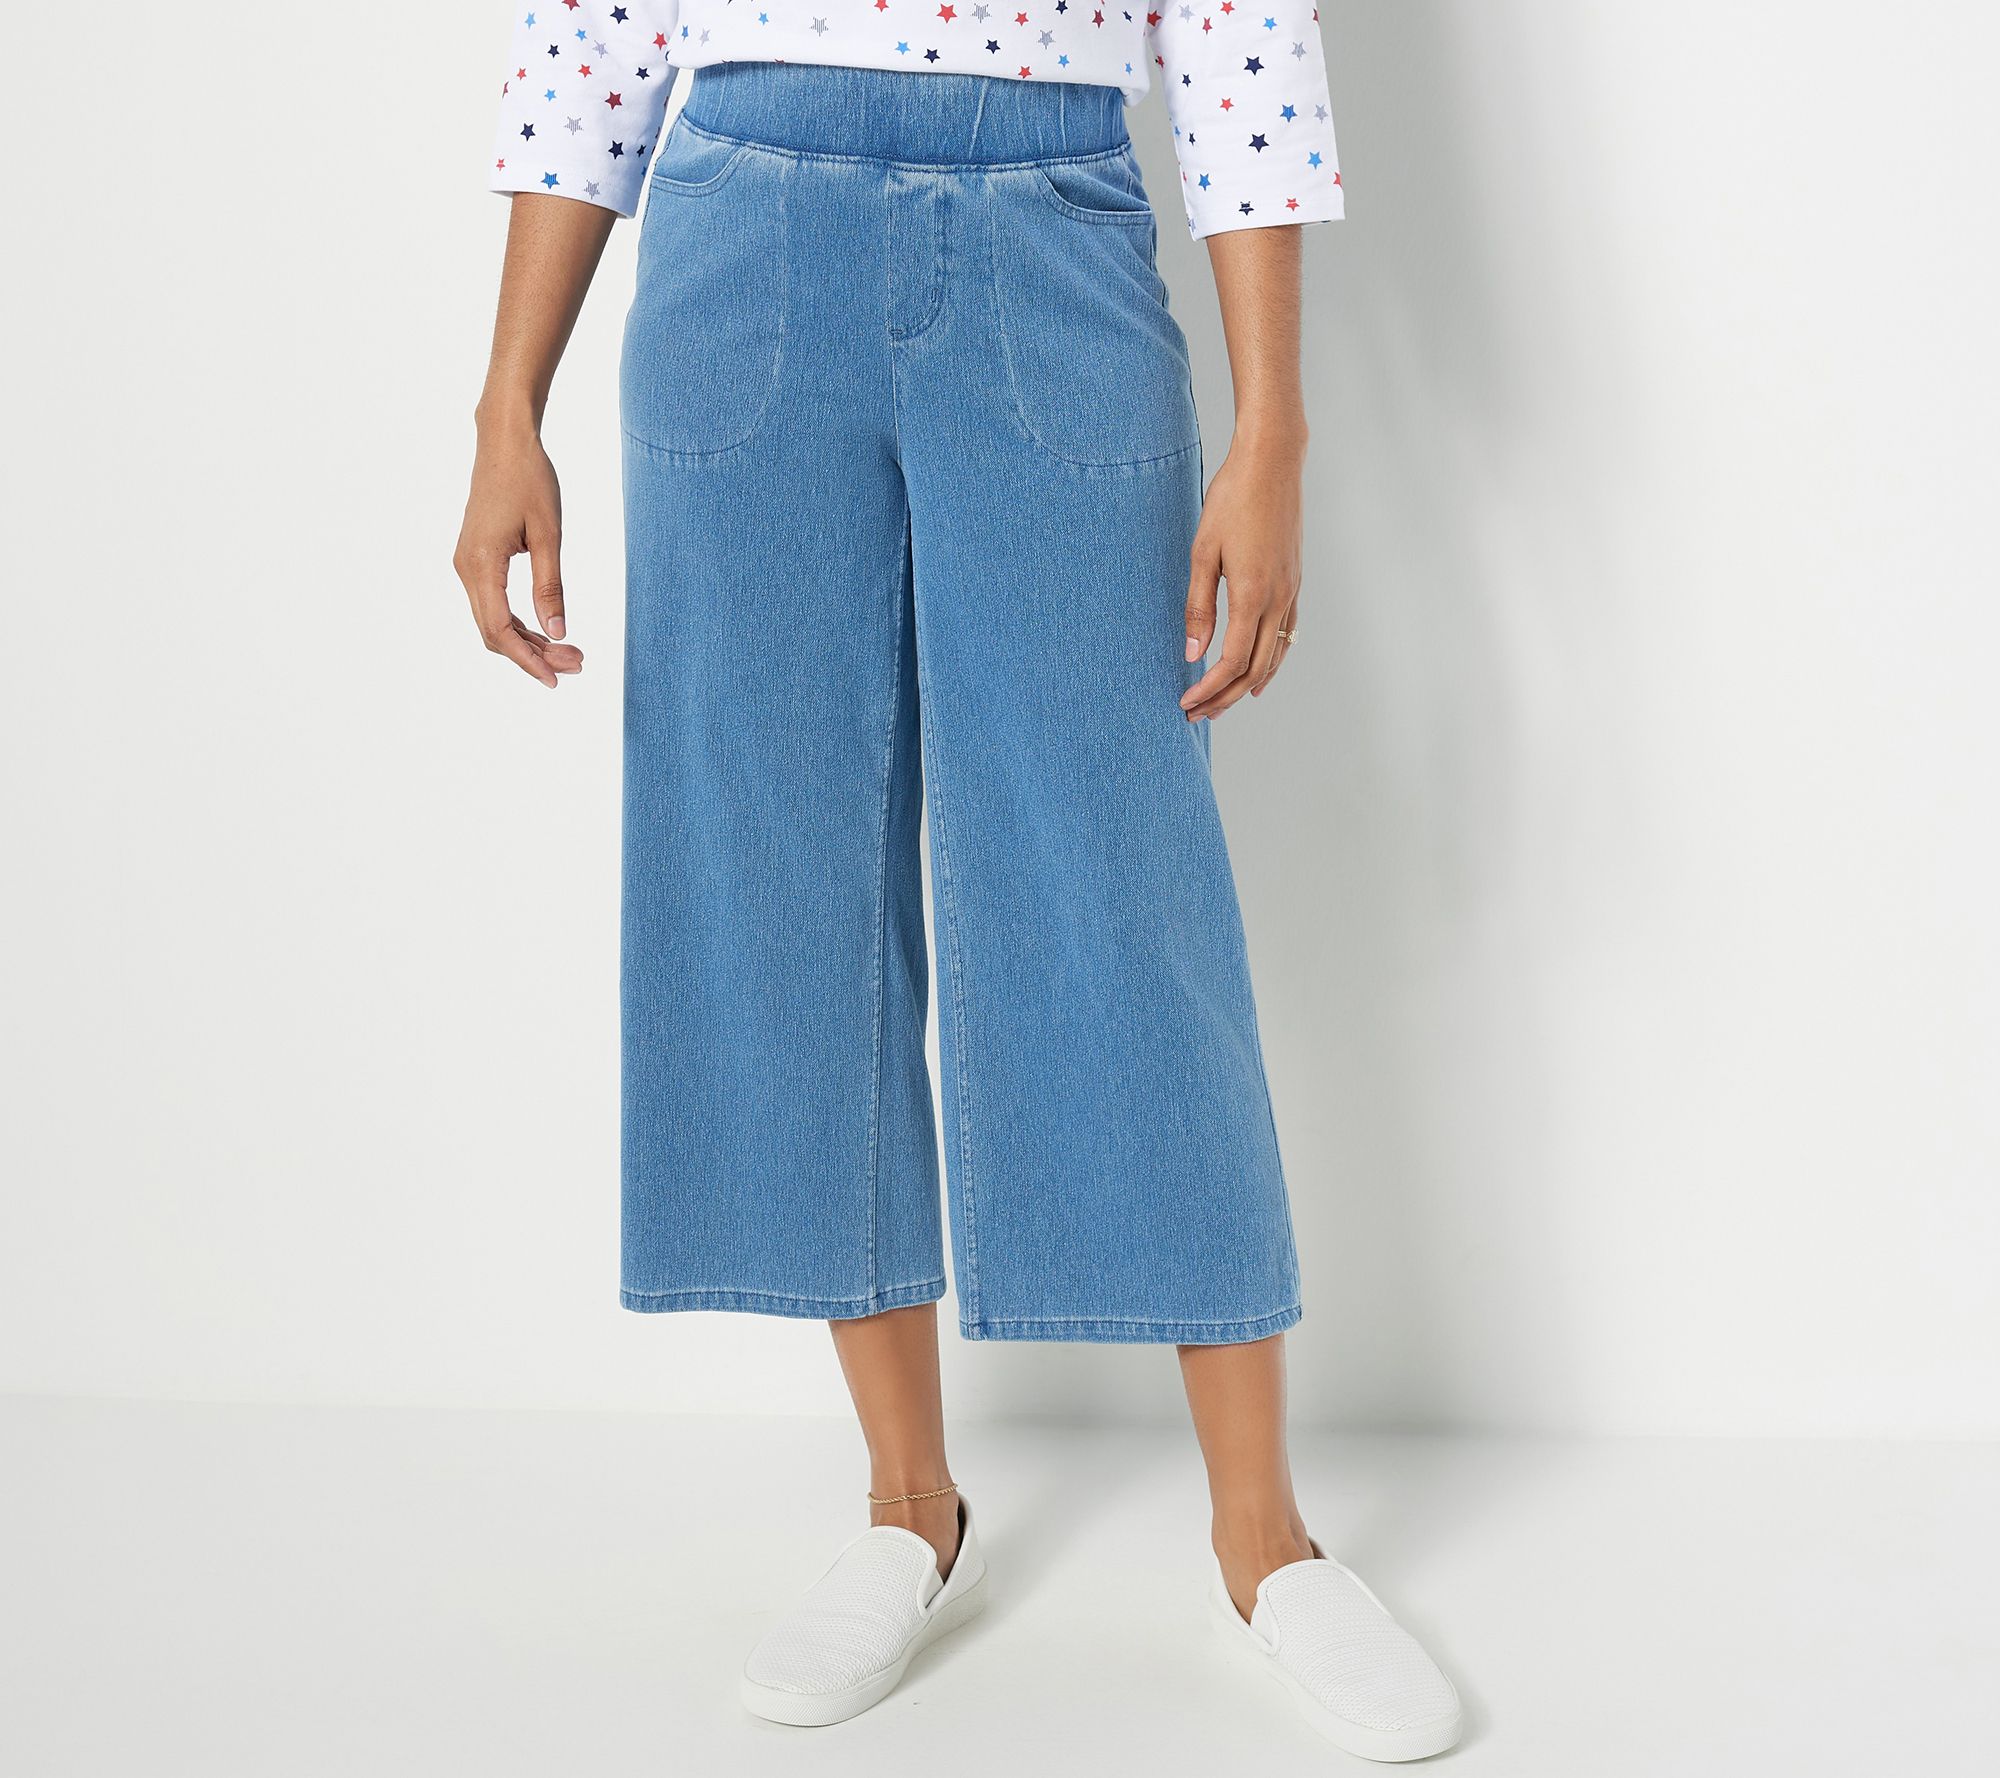 Denim & Co. Comfy Knit Air Petite Straight Crop Pant with Side Slits 